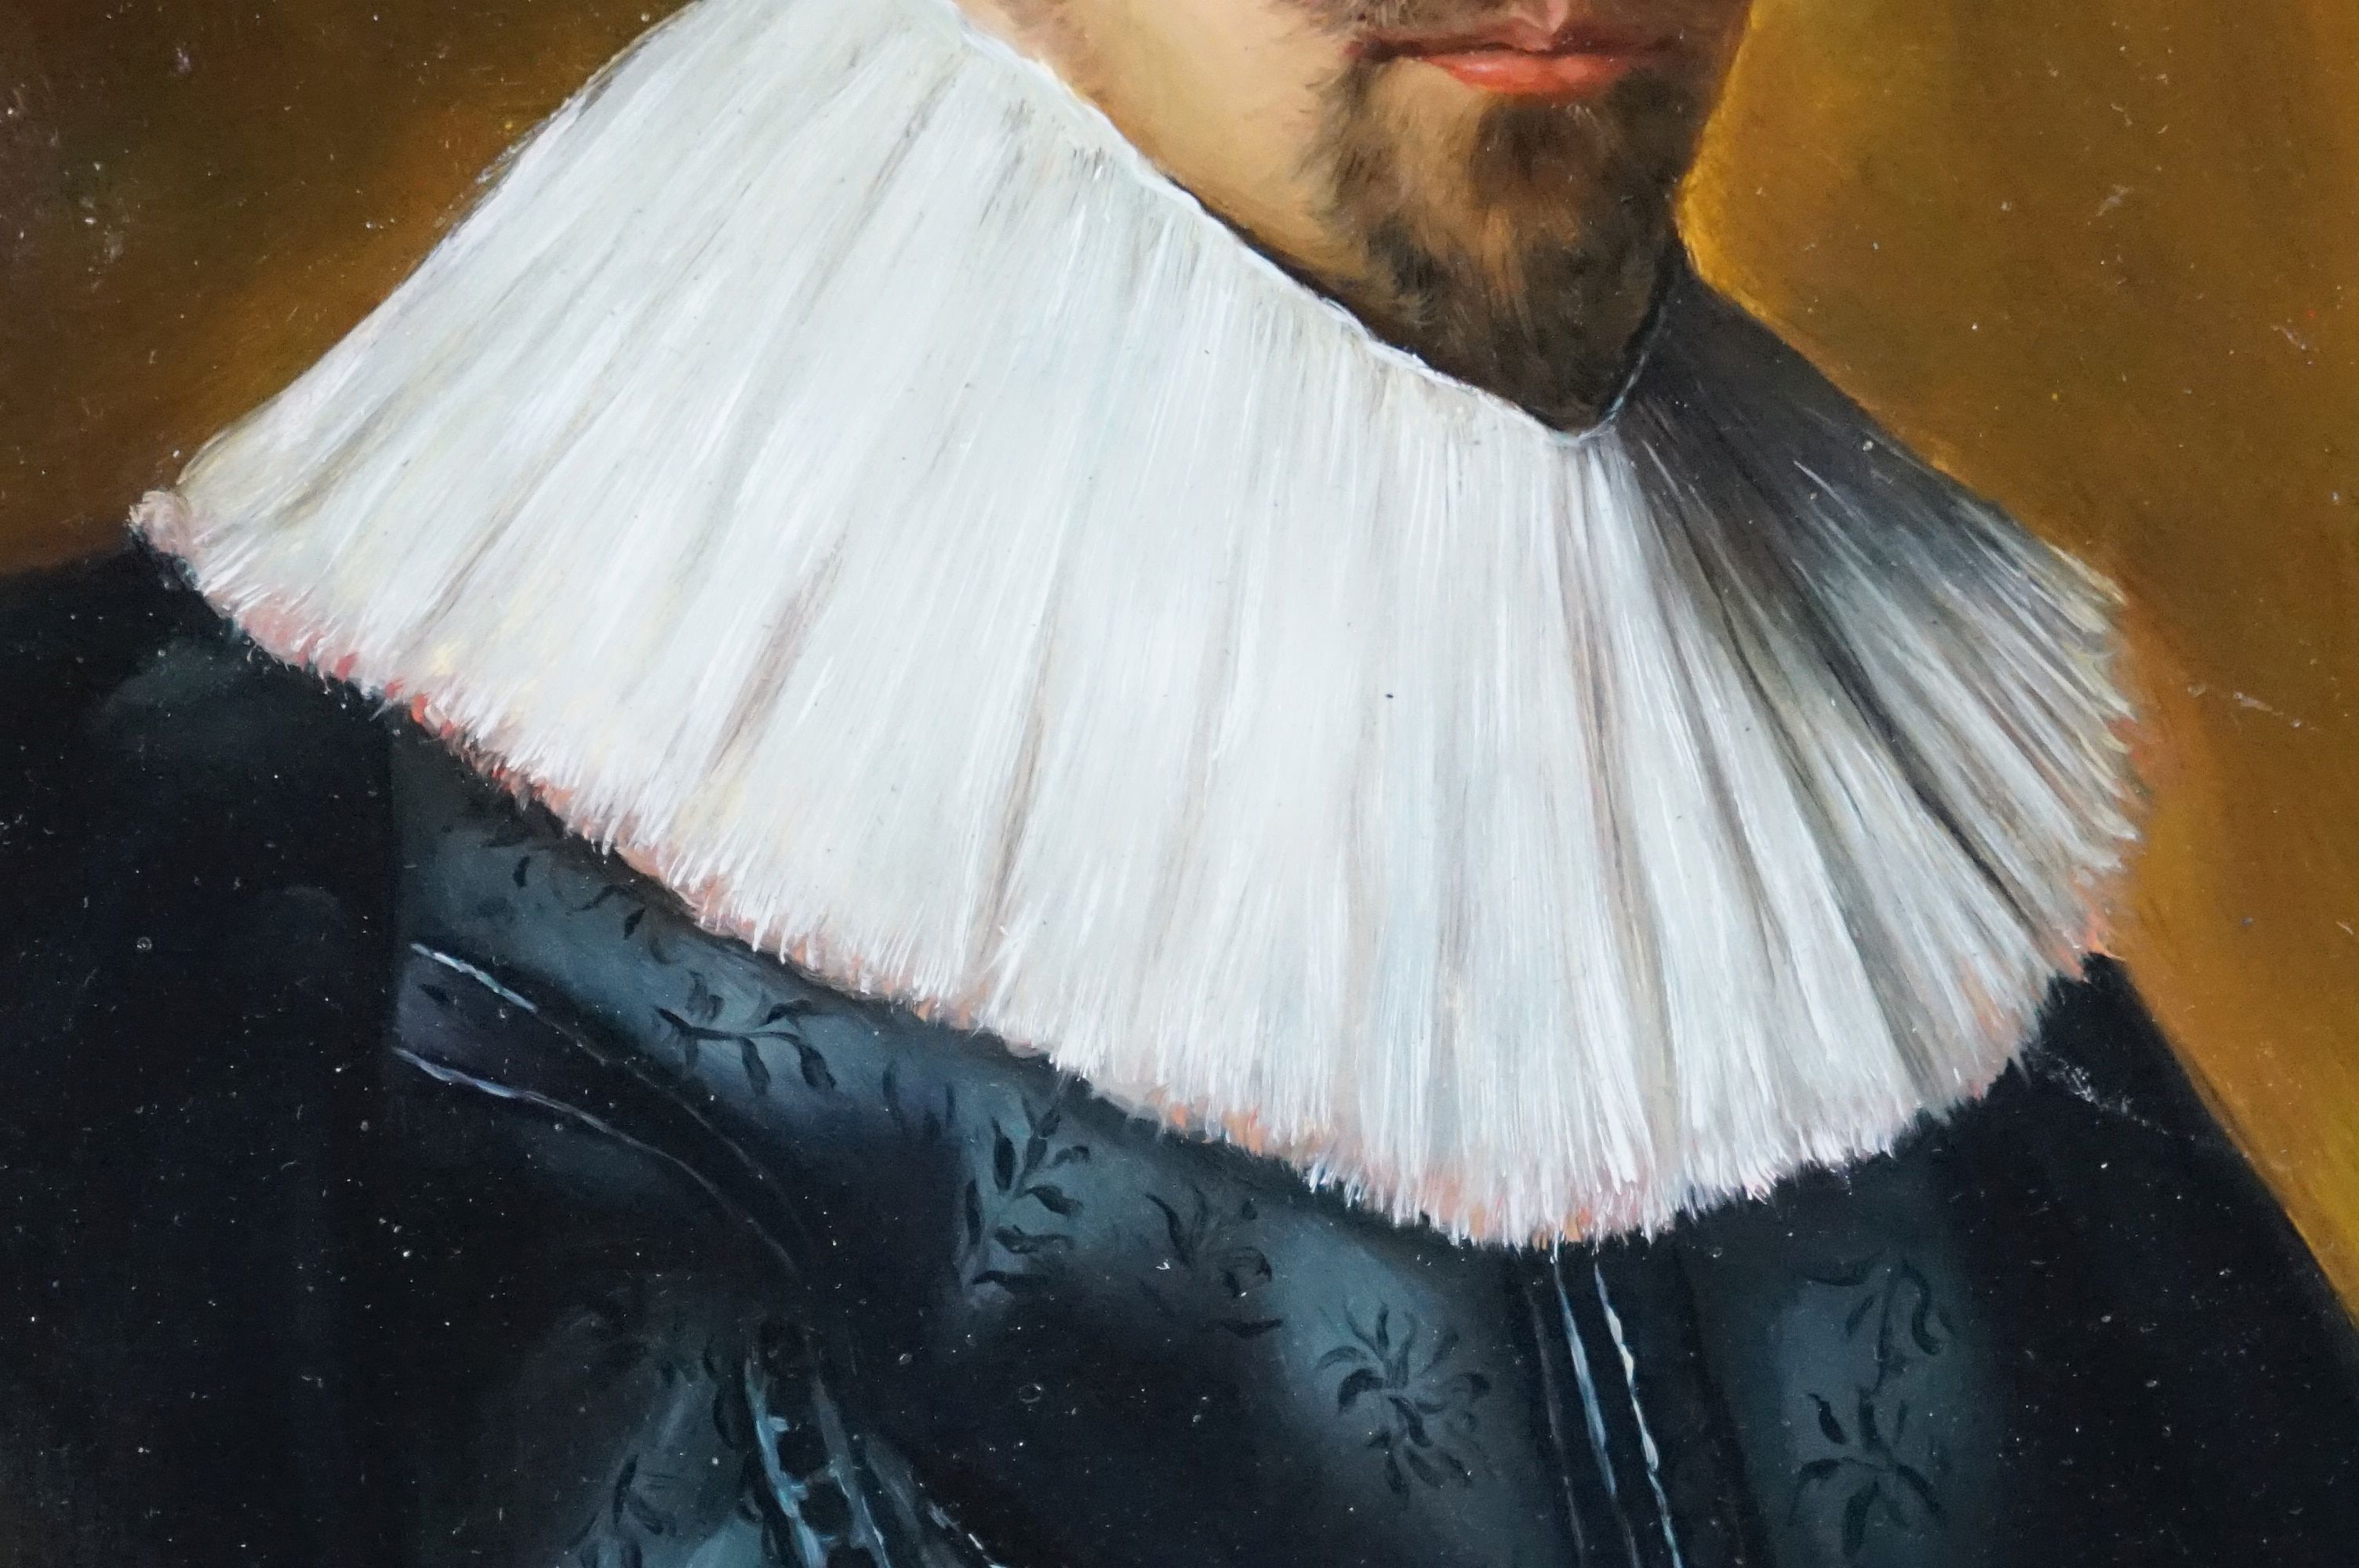 Oil on Panel Portrait of a Distinguished 17th century Gentleman in Gown with Ruff Collar and Sleeves - Image 4 of 6